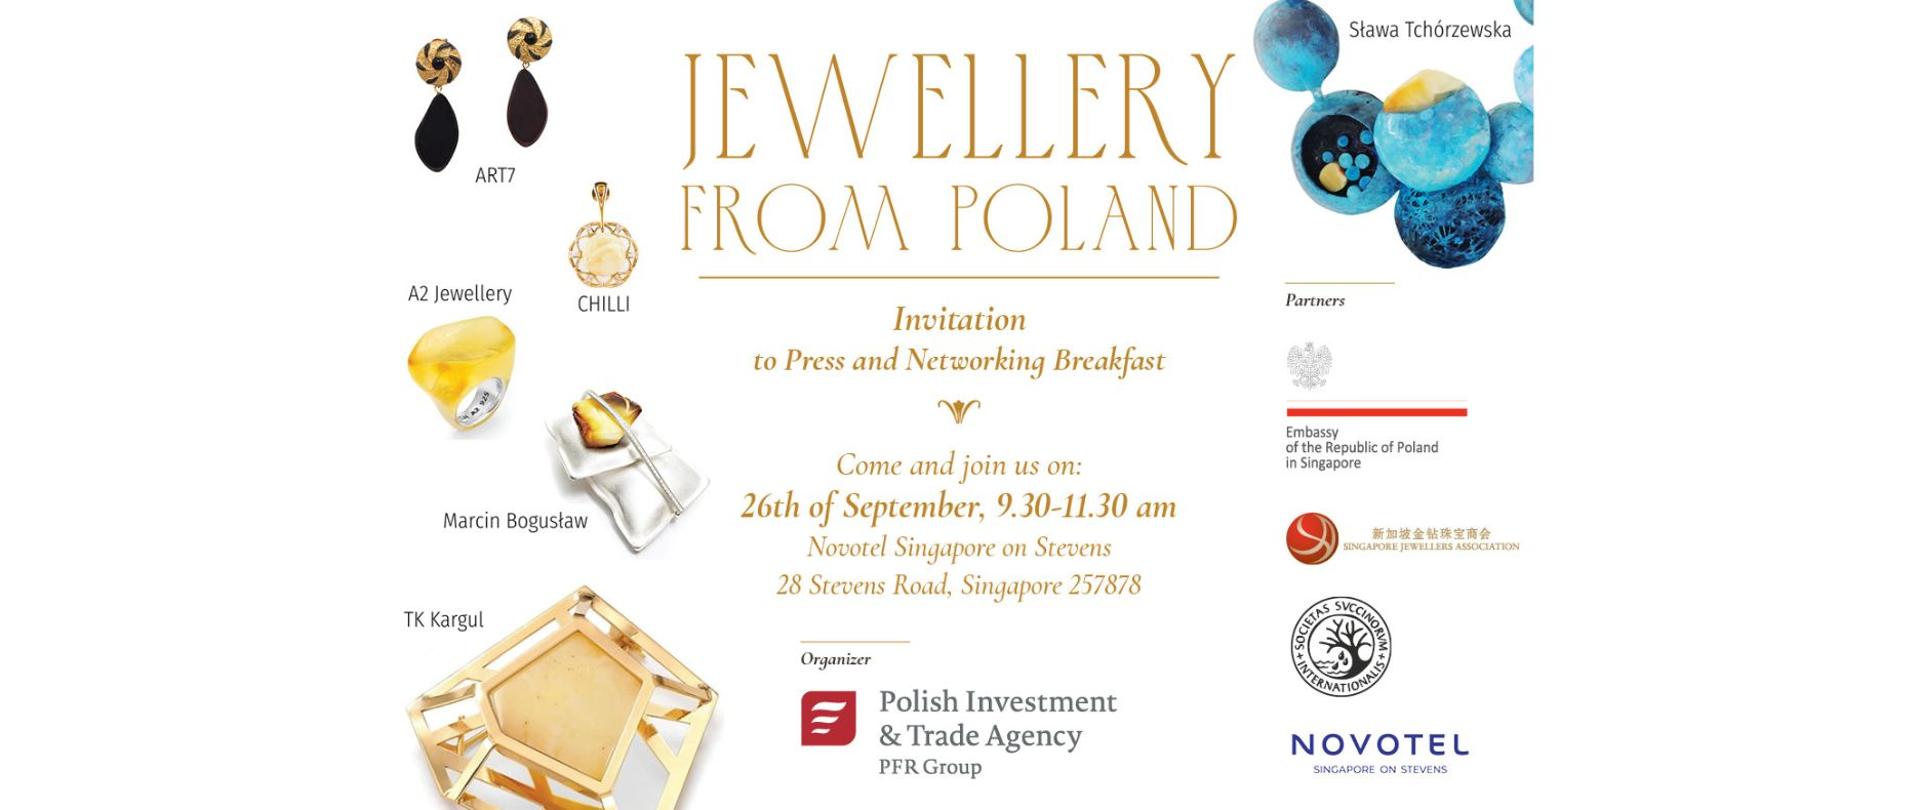 “Jewellery from Poland. Amber - Treasure of the Baltic Sea” 